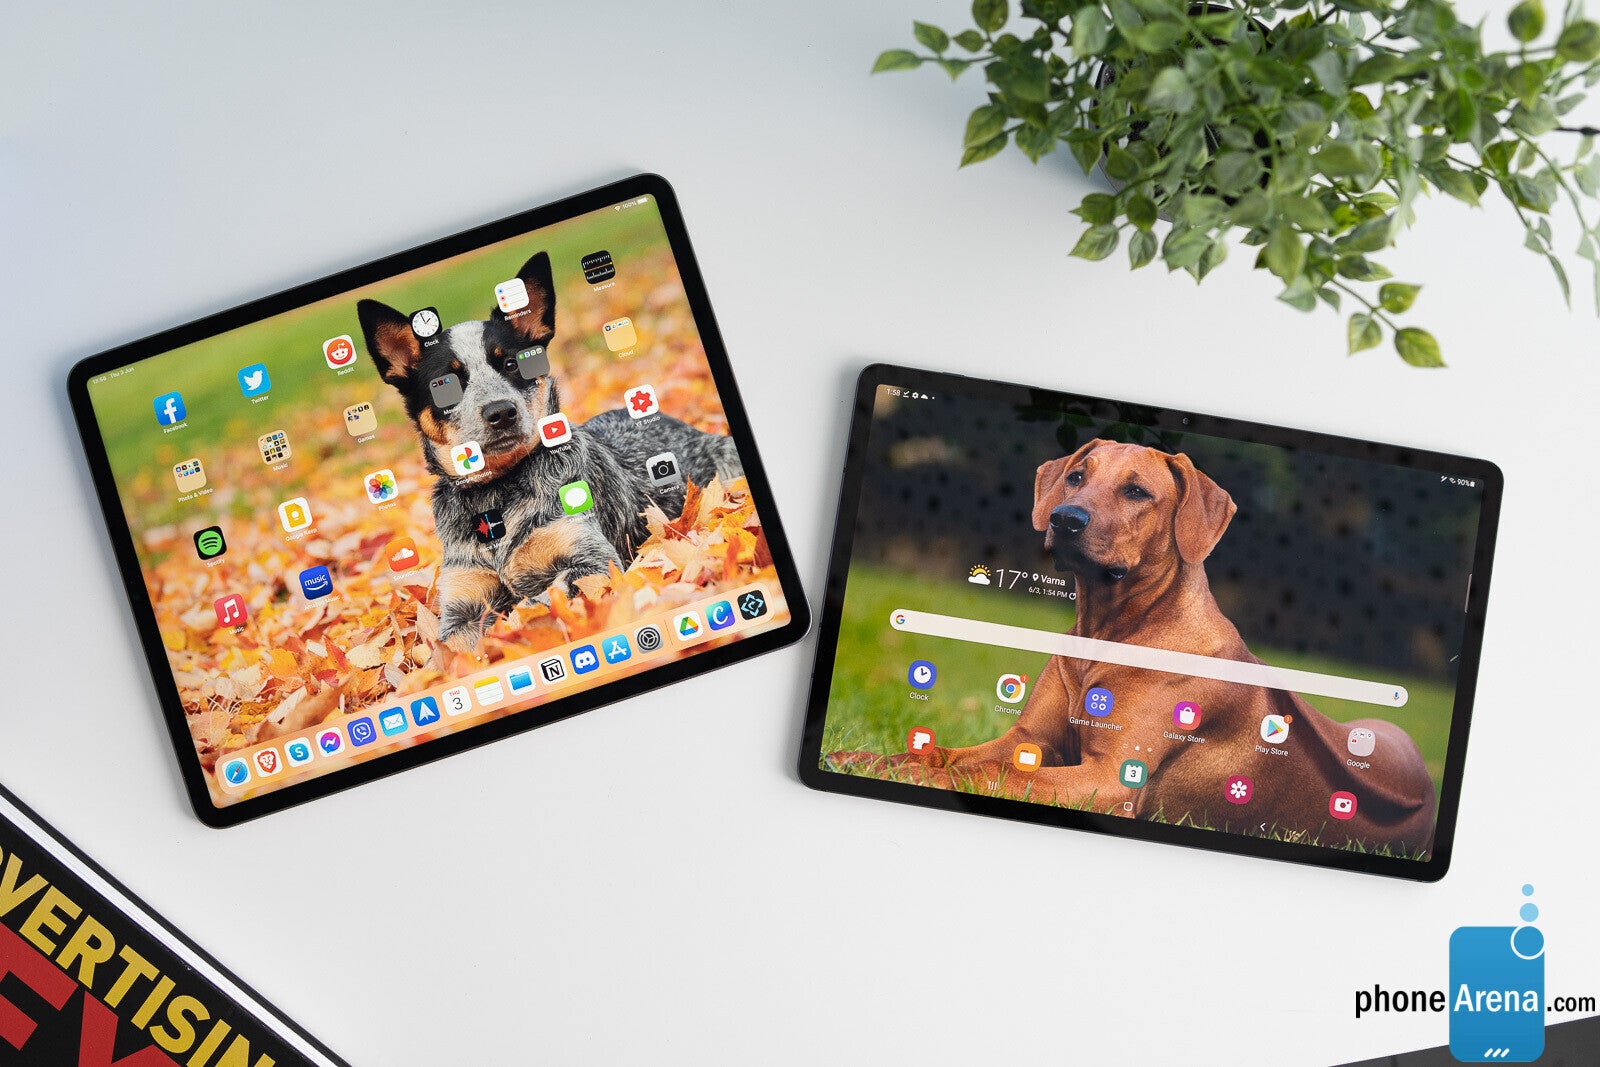 Left - iPad Pro, right - Galaxy Tab S7, two of the best flagship tablets from the two camps (iPad and Android) - Why Android tablets are awesome, yet I use an iPad